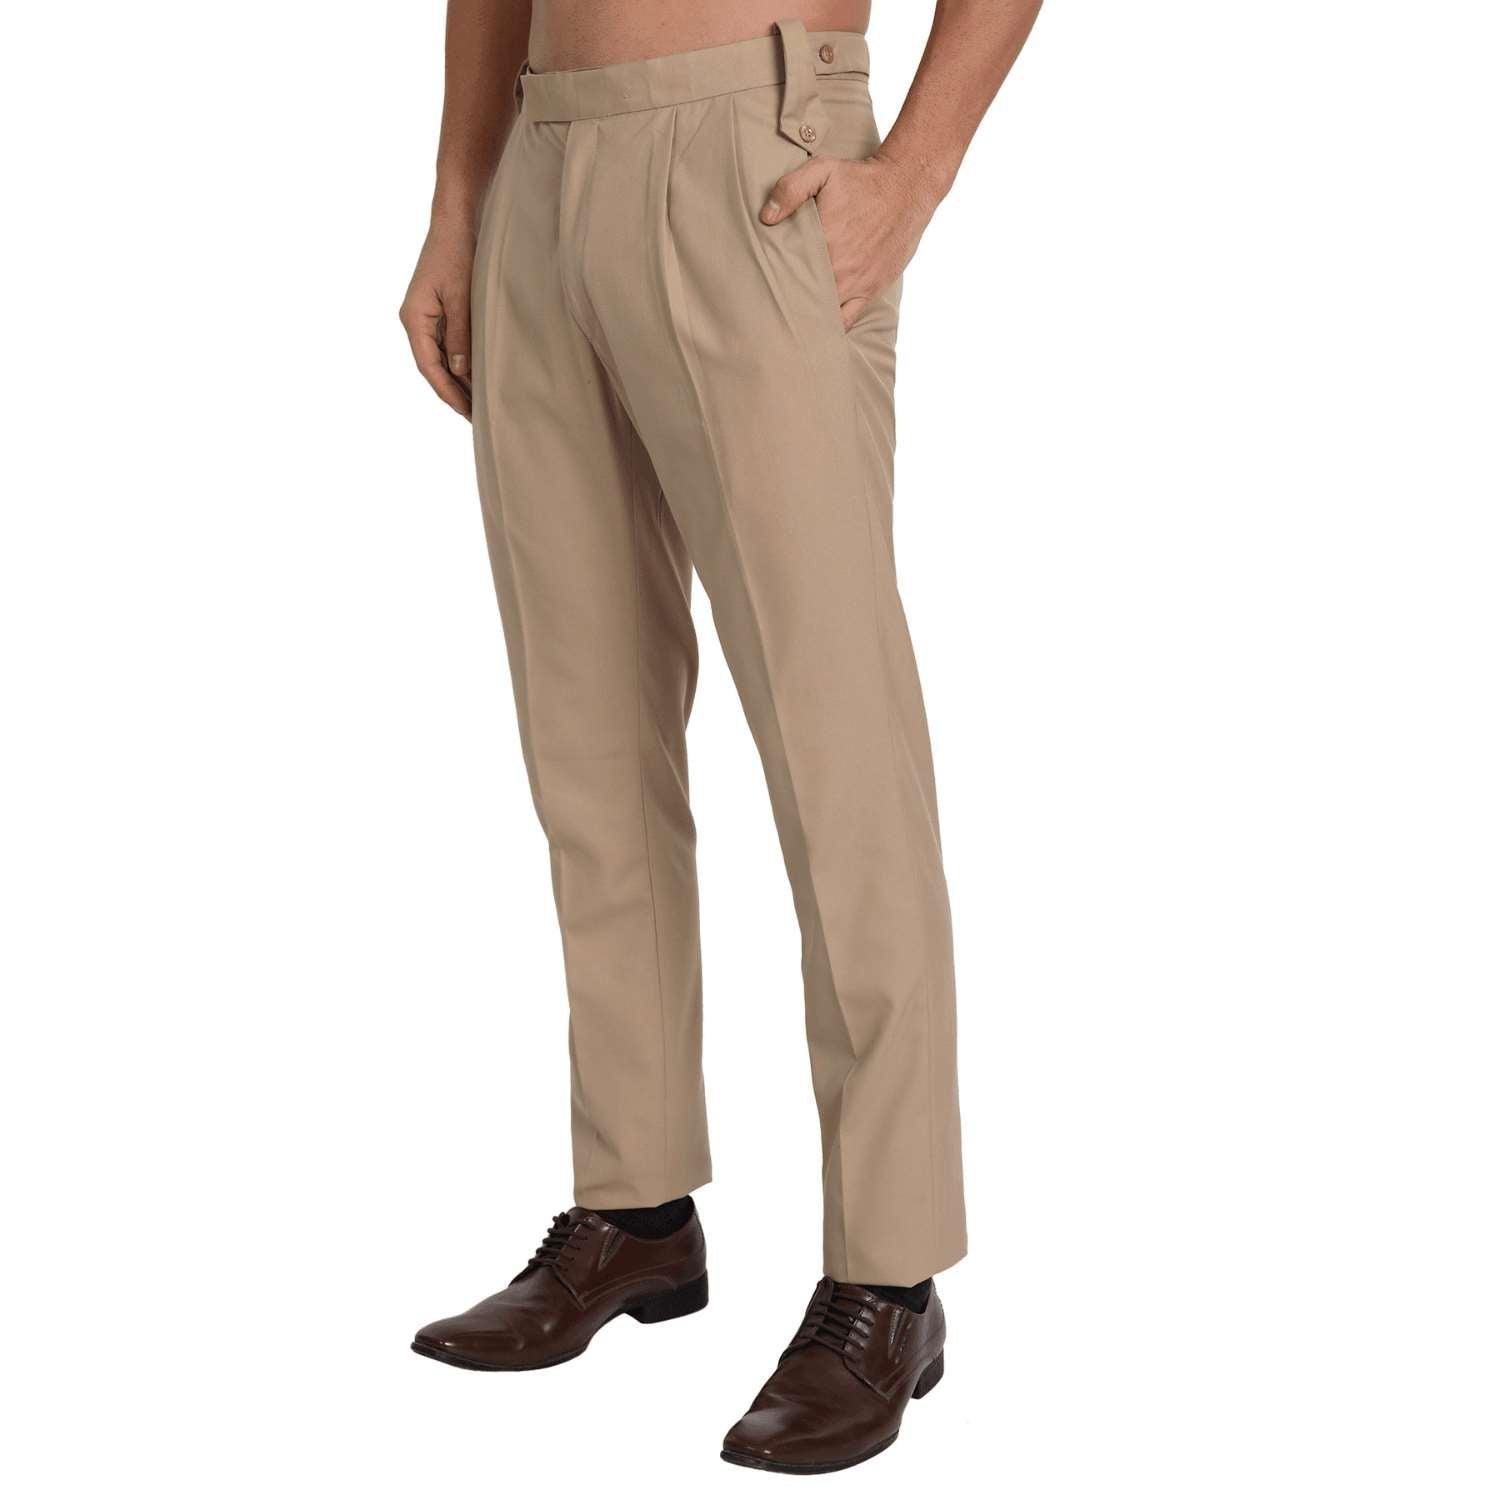 Police Uniforms  First Responder Uniforms  Horace Small  Products   Heritage Trouser